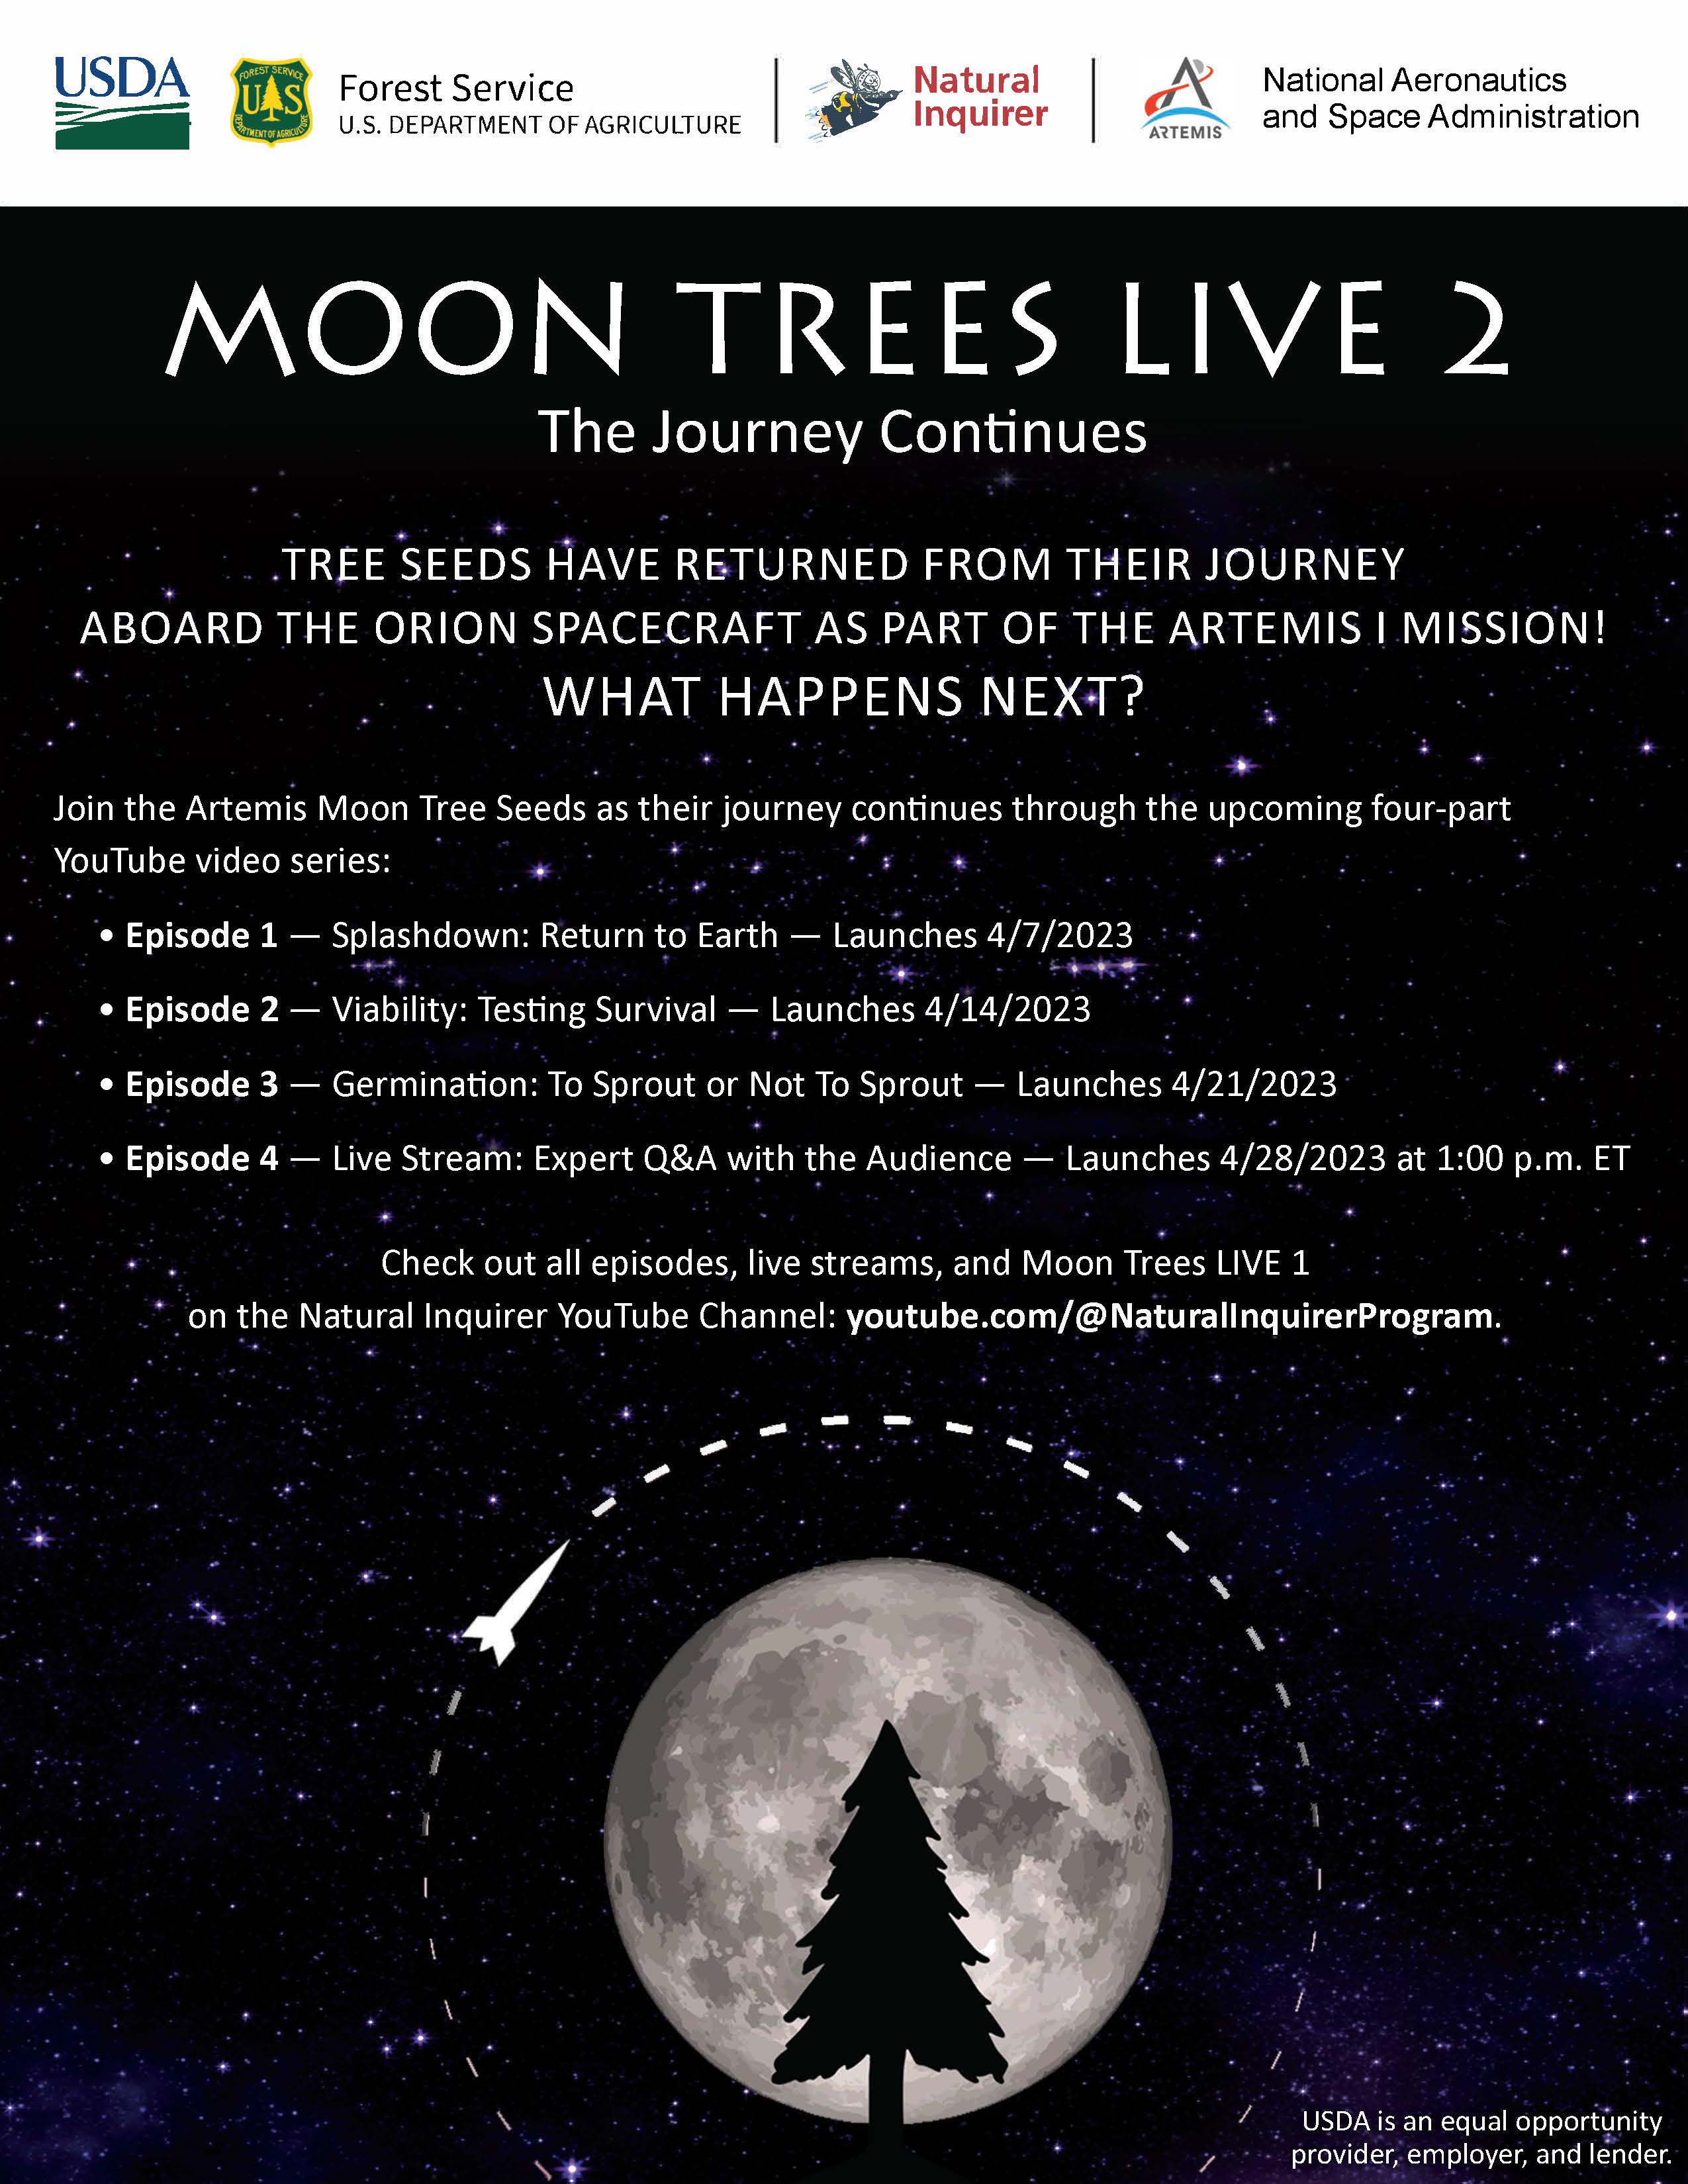 Text that says, "Moon Trees Live 2: The Journey Continues. Tree seeds have returned from their journey aboard the Orion Spacecraft as part of the Artemis 1 Mission! What happens next? Join the Artemis Moon Tree Seeds as their journey continuees through the upcoming four-part YouTube video series. Episode 1: Splashdown: Return to Earth. Episode 2: Viability: Testing Survival. Episode 3: Germination: To Sprout or Not To Sprout. Episode 4: Live Stream: Expert Q&A with the Audience. Check out all episodes, live streams, and Moon Trees LIVE 1 on the Natural Inquirer YouTube Channel: youtube.com/@NaturalInquirerProgram